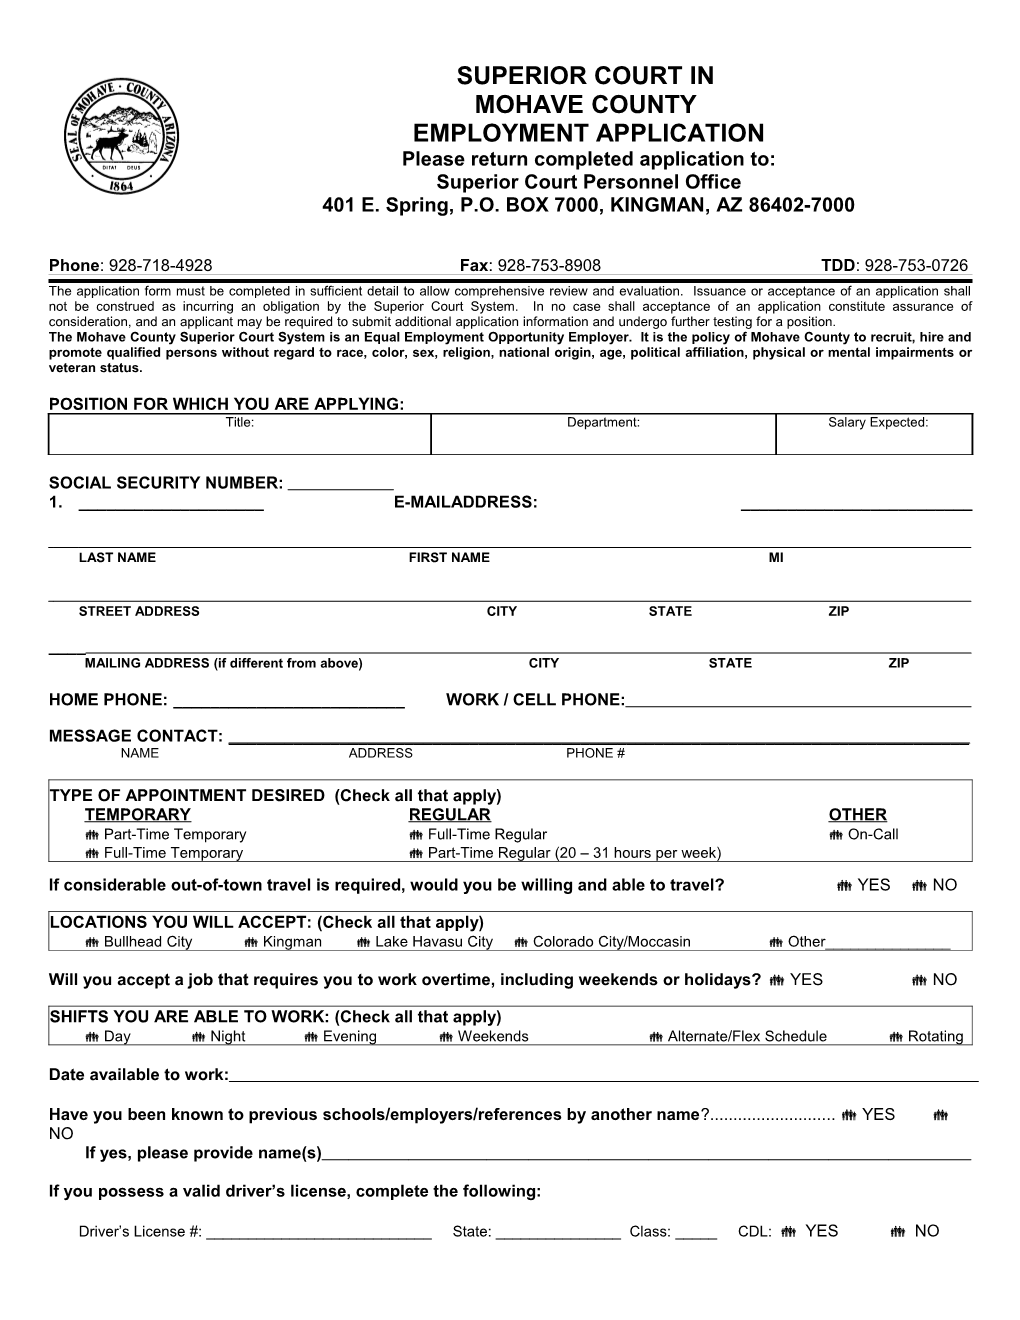 Revised Mohave County Application